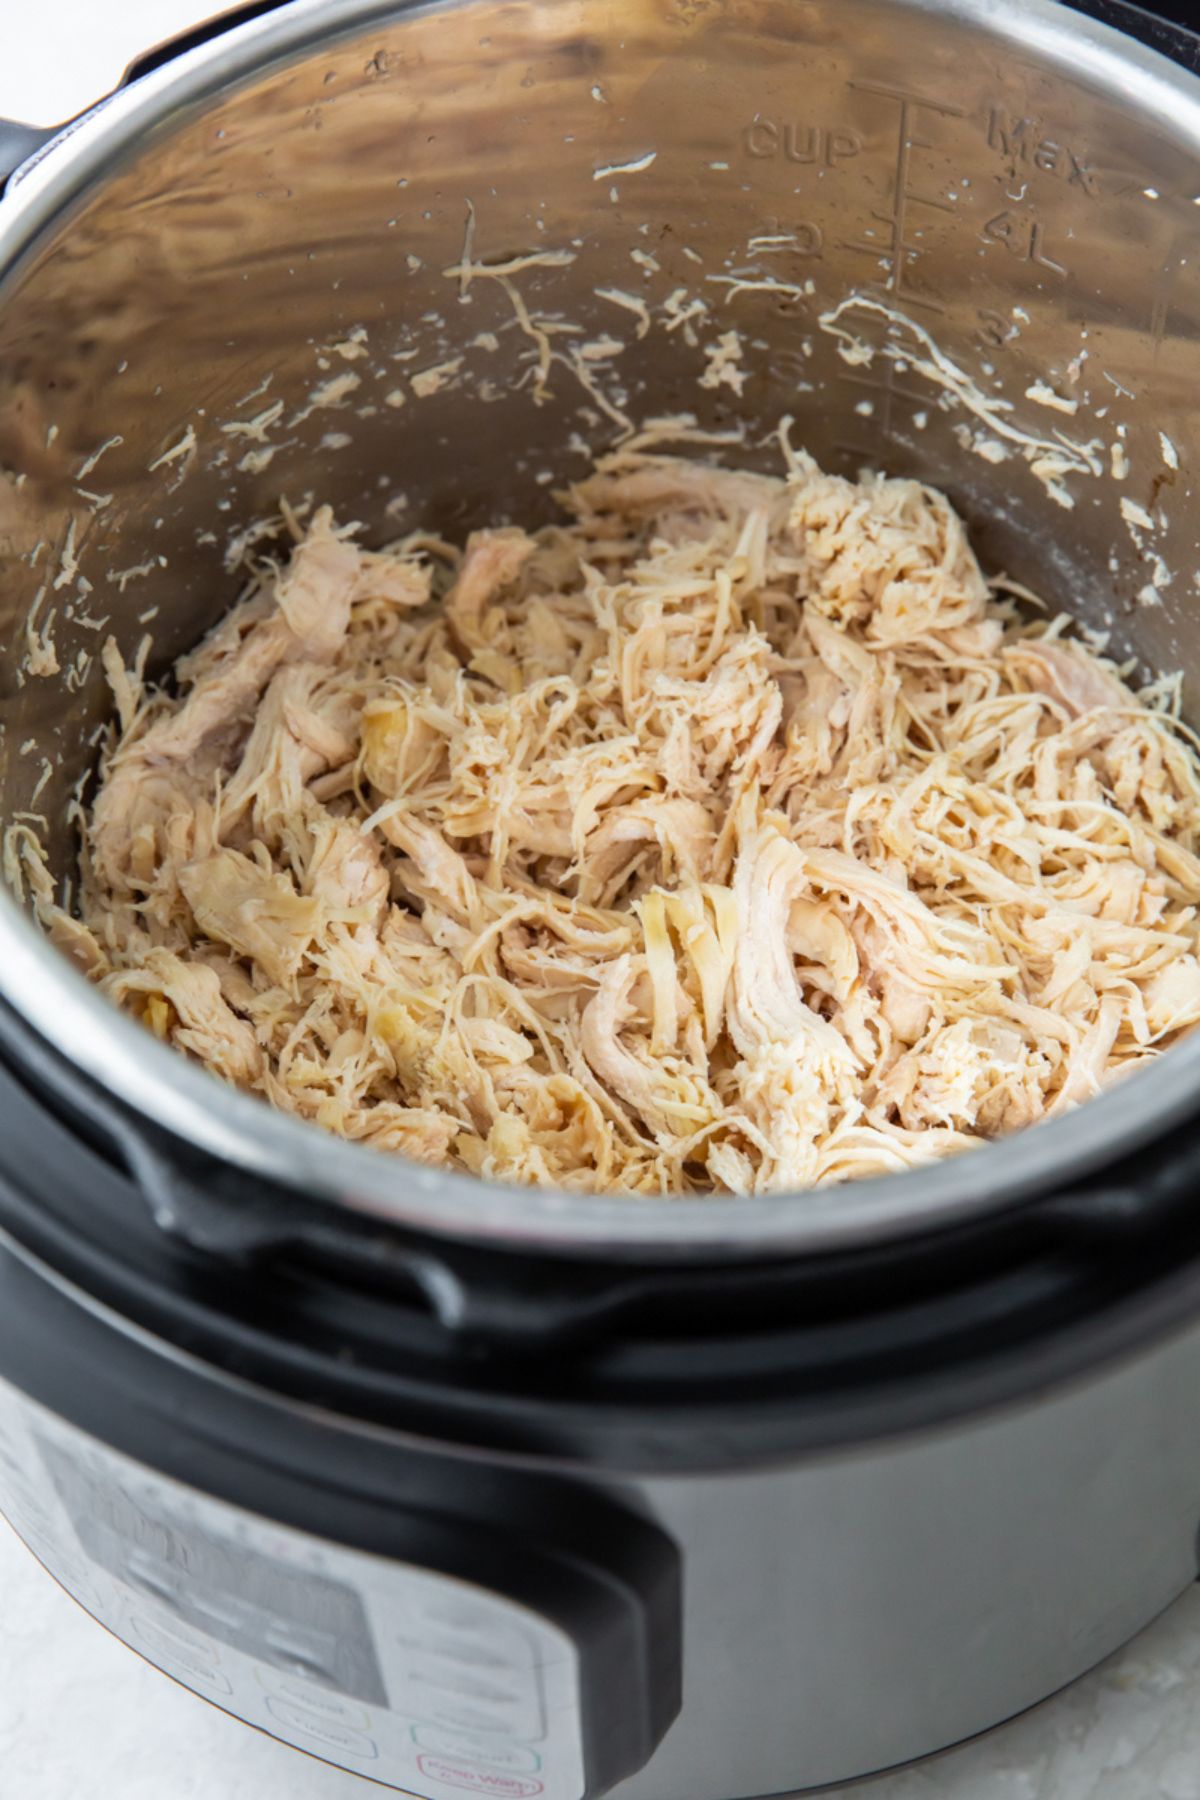 frozen shredded chicken breasts cooked in the Instant Pot